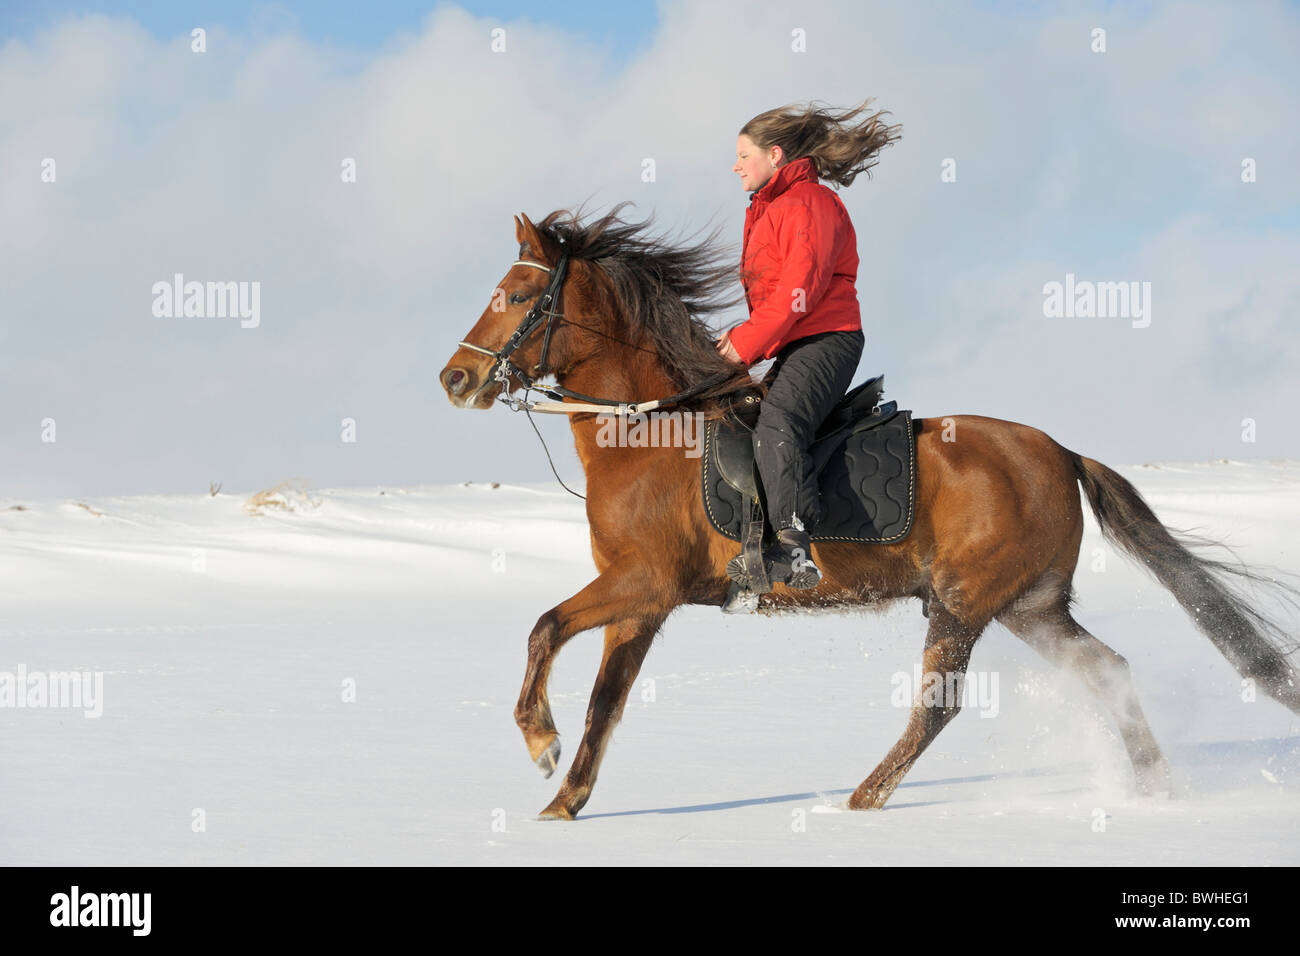 Young rider on back of her Paso Fino horse galloping in snow Stock Photo